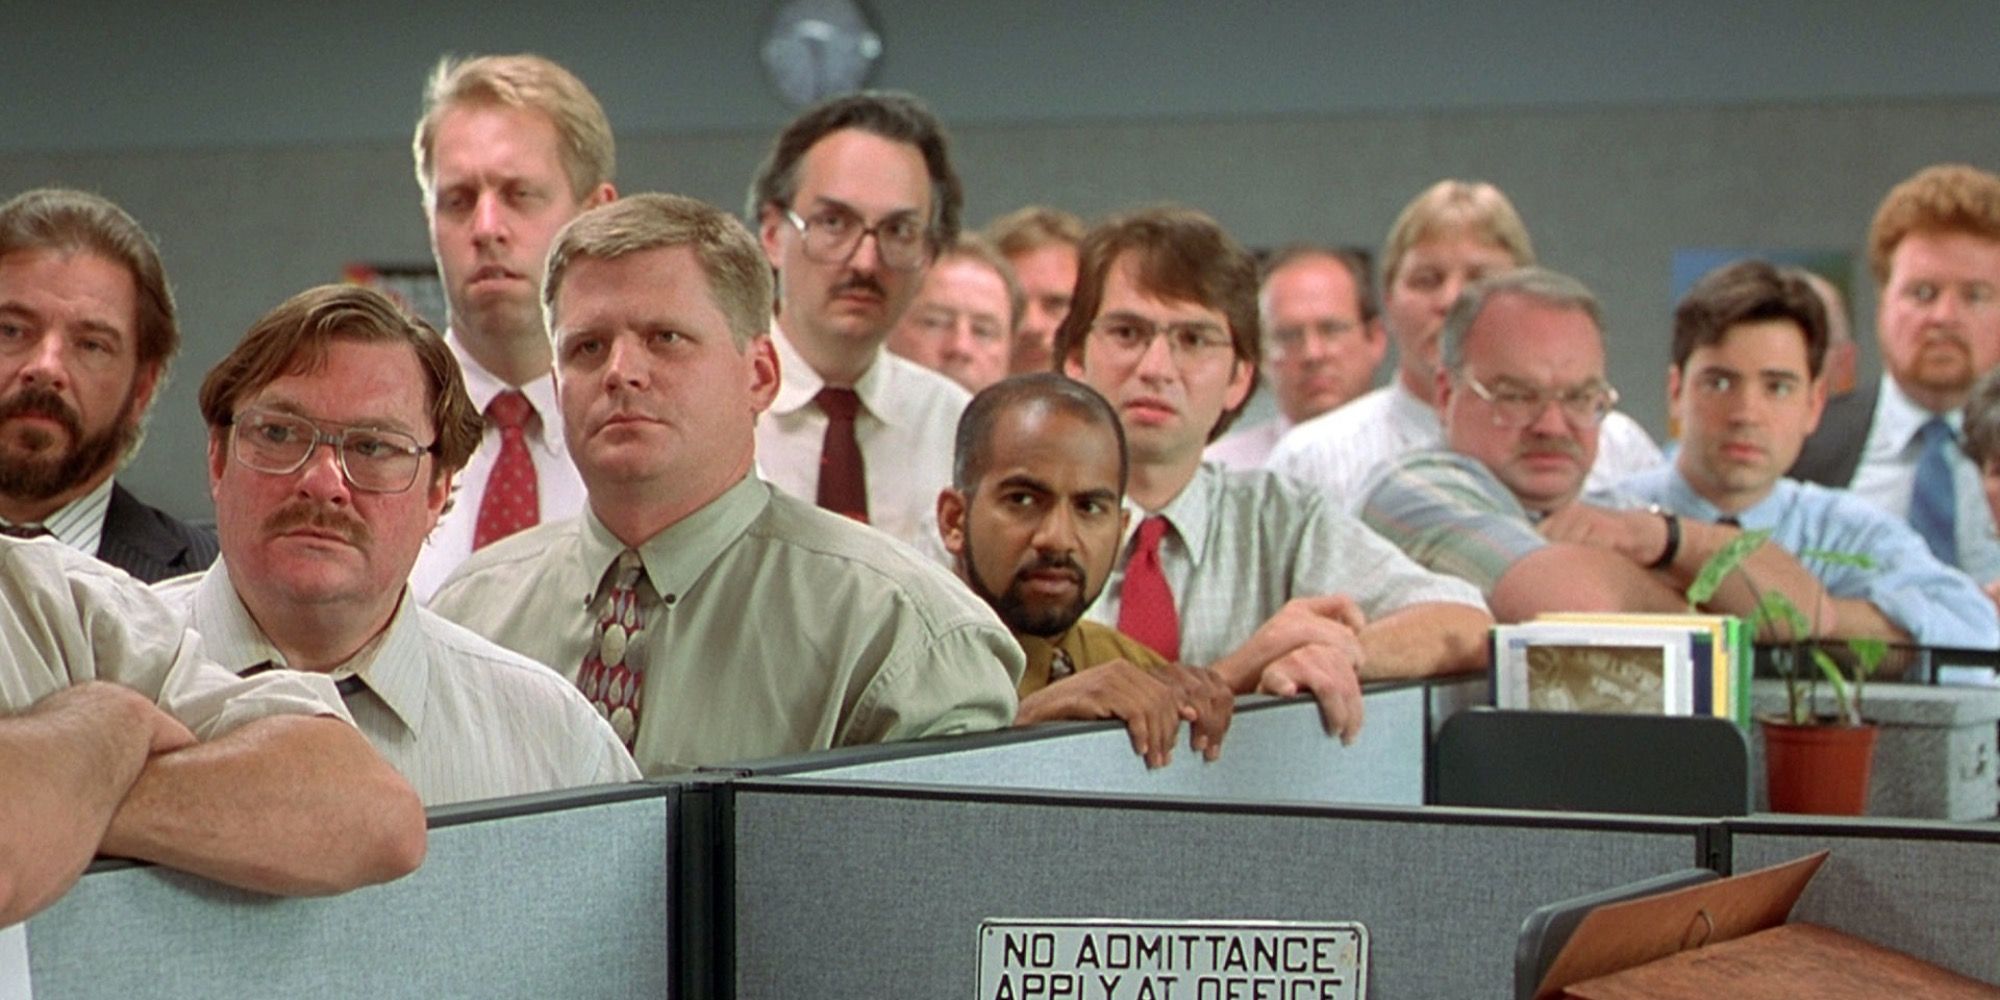 The cast of Office Space huddled together